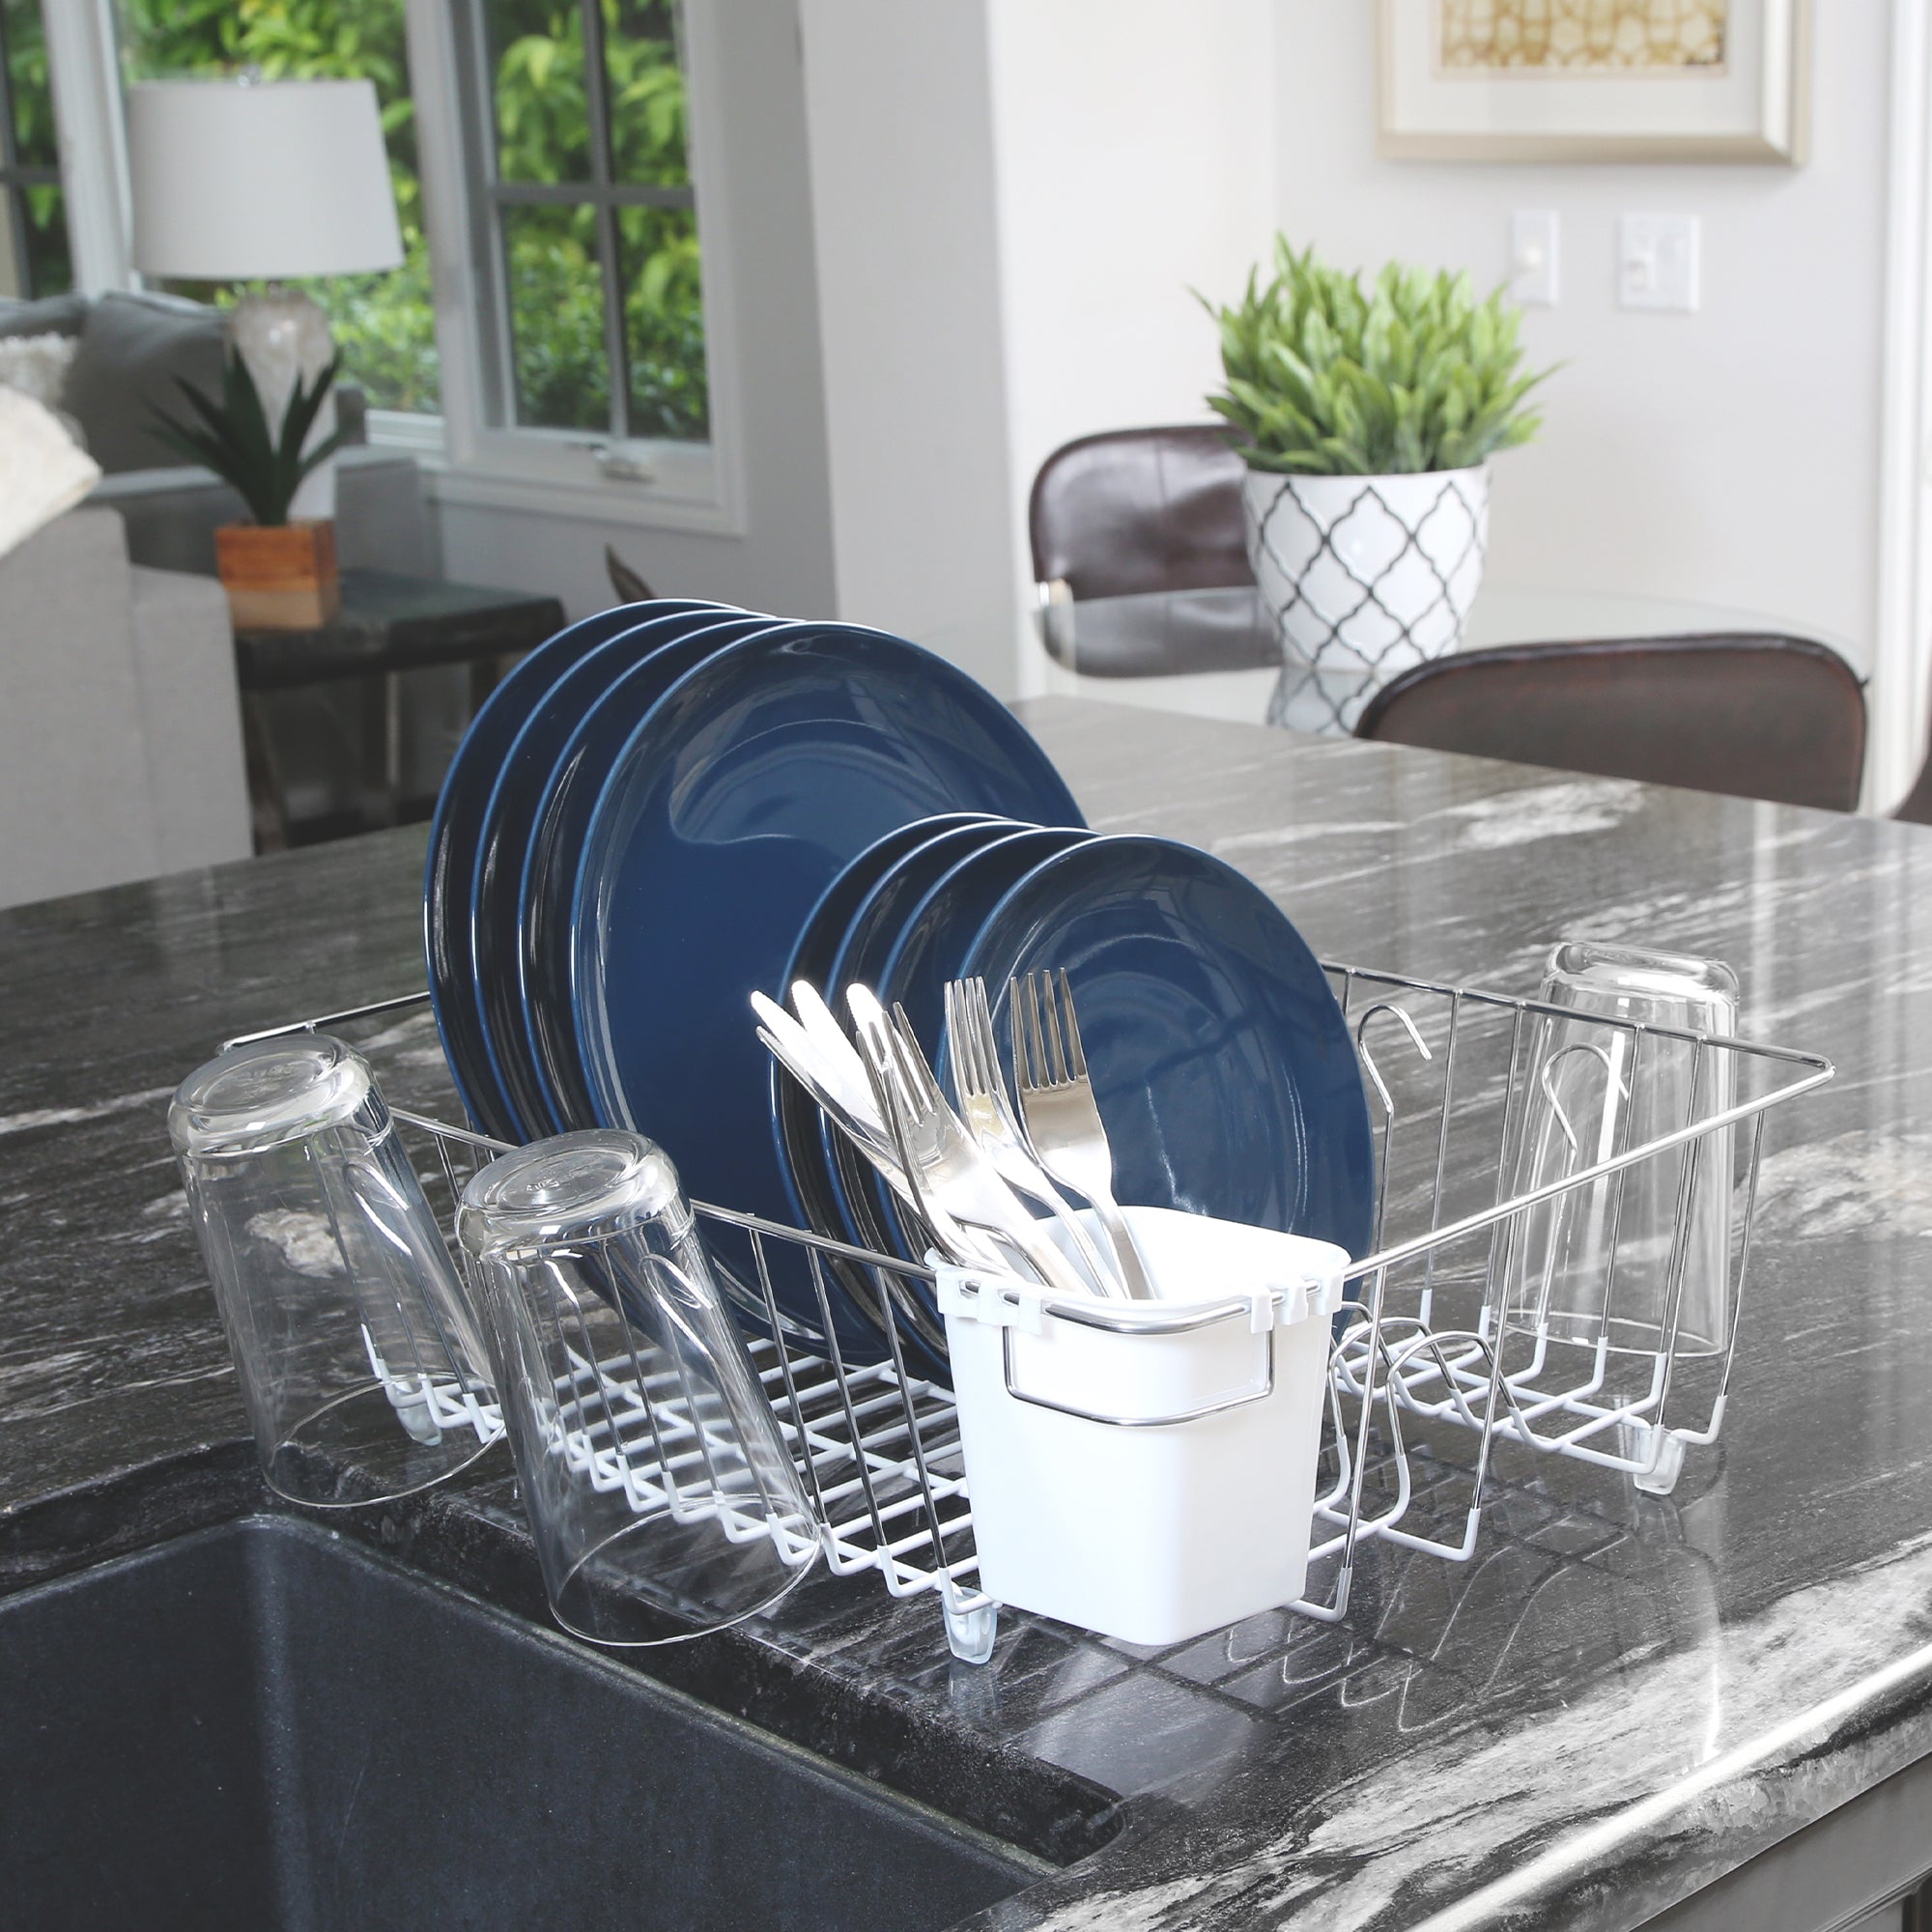 https://cdn.shopify.com/s/files/1/2393/7799/products/dish-drainer-rack-for-in-sink-or-counter-drying-large-smart-design-kitchen-8117818-incrementing-number-372119.jpg?v=1679343277